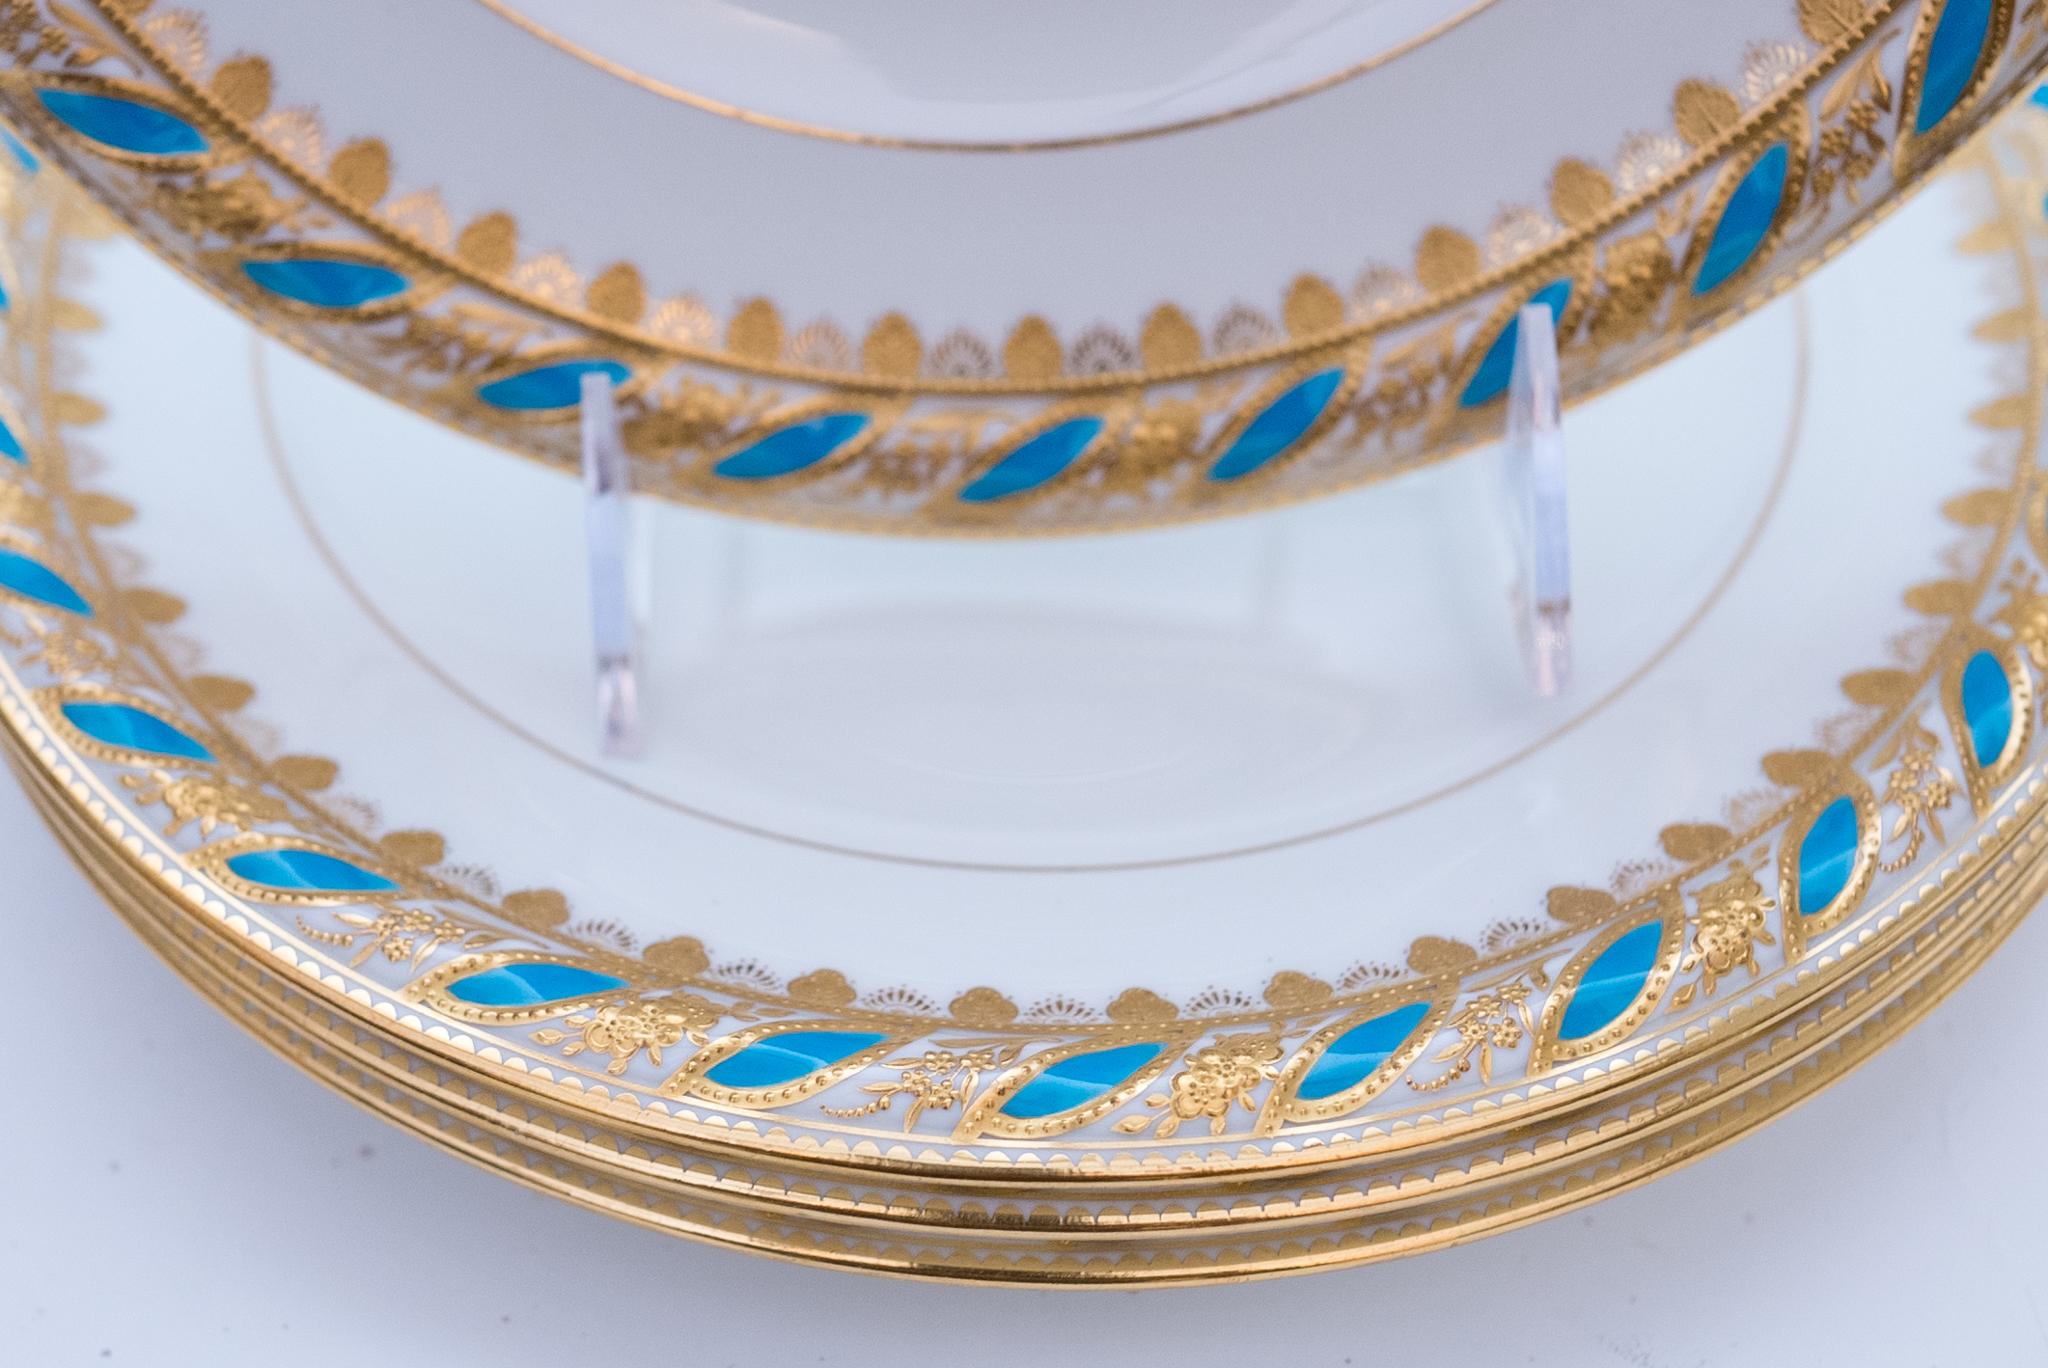 Hand-Crafted 12 Antique Tiffany Turquoise & Gilt Encrusted Dinner Plates, Circa 1890